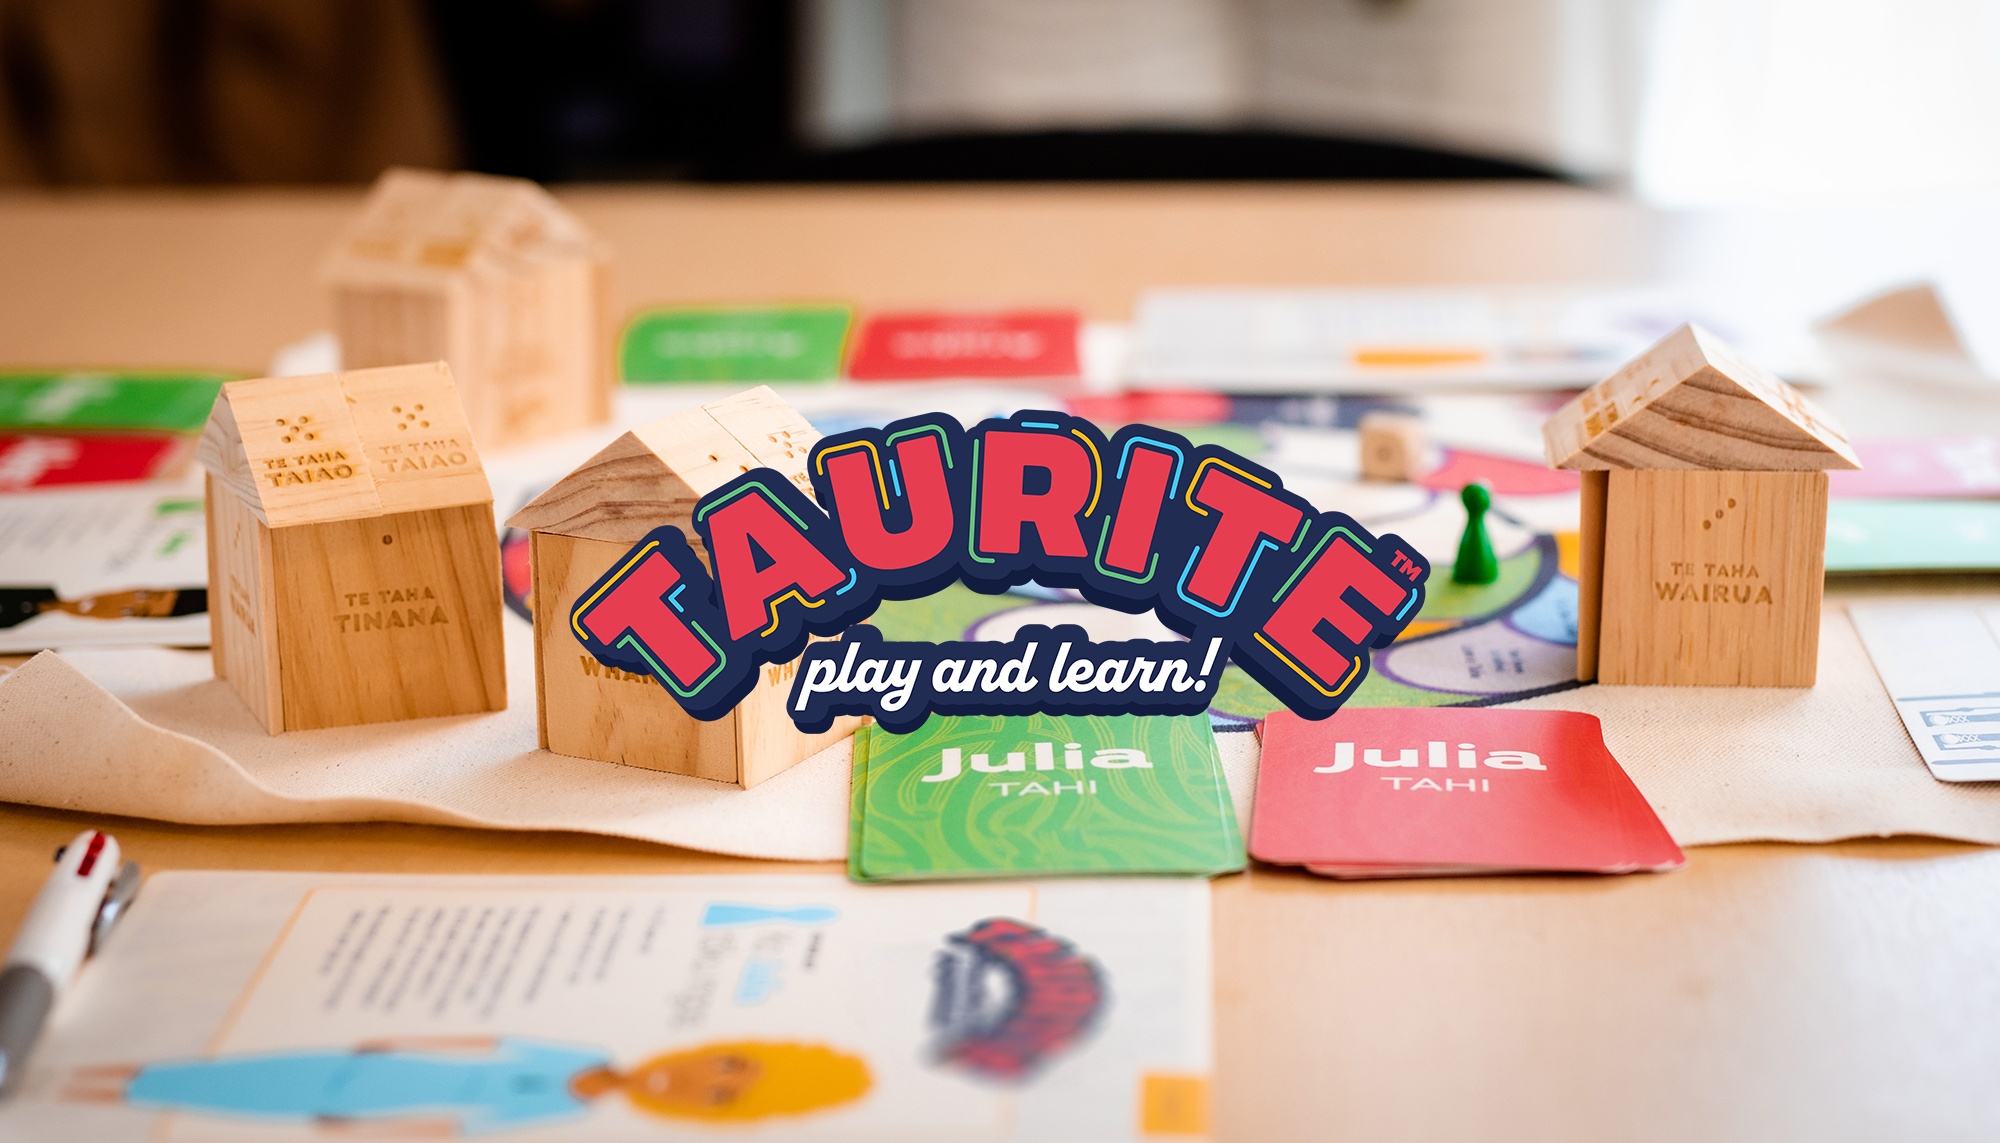 The Taurite logo with a picture of the board game behind.